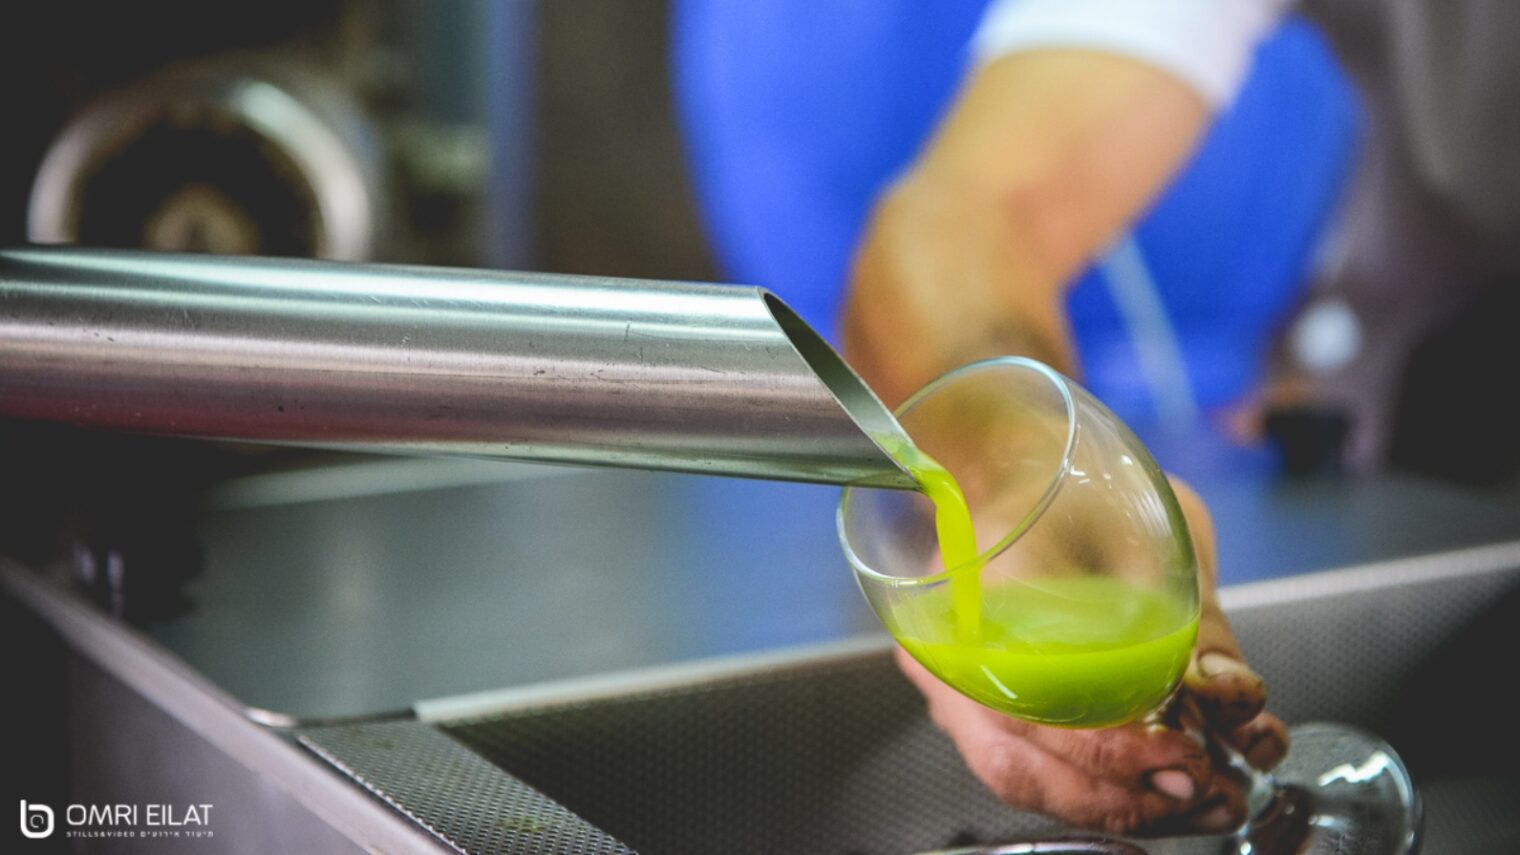 Extra-virgin olive oil being produced at Galili. Photo by Omri Eilat